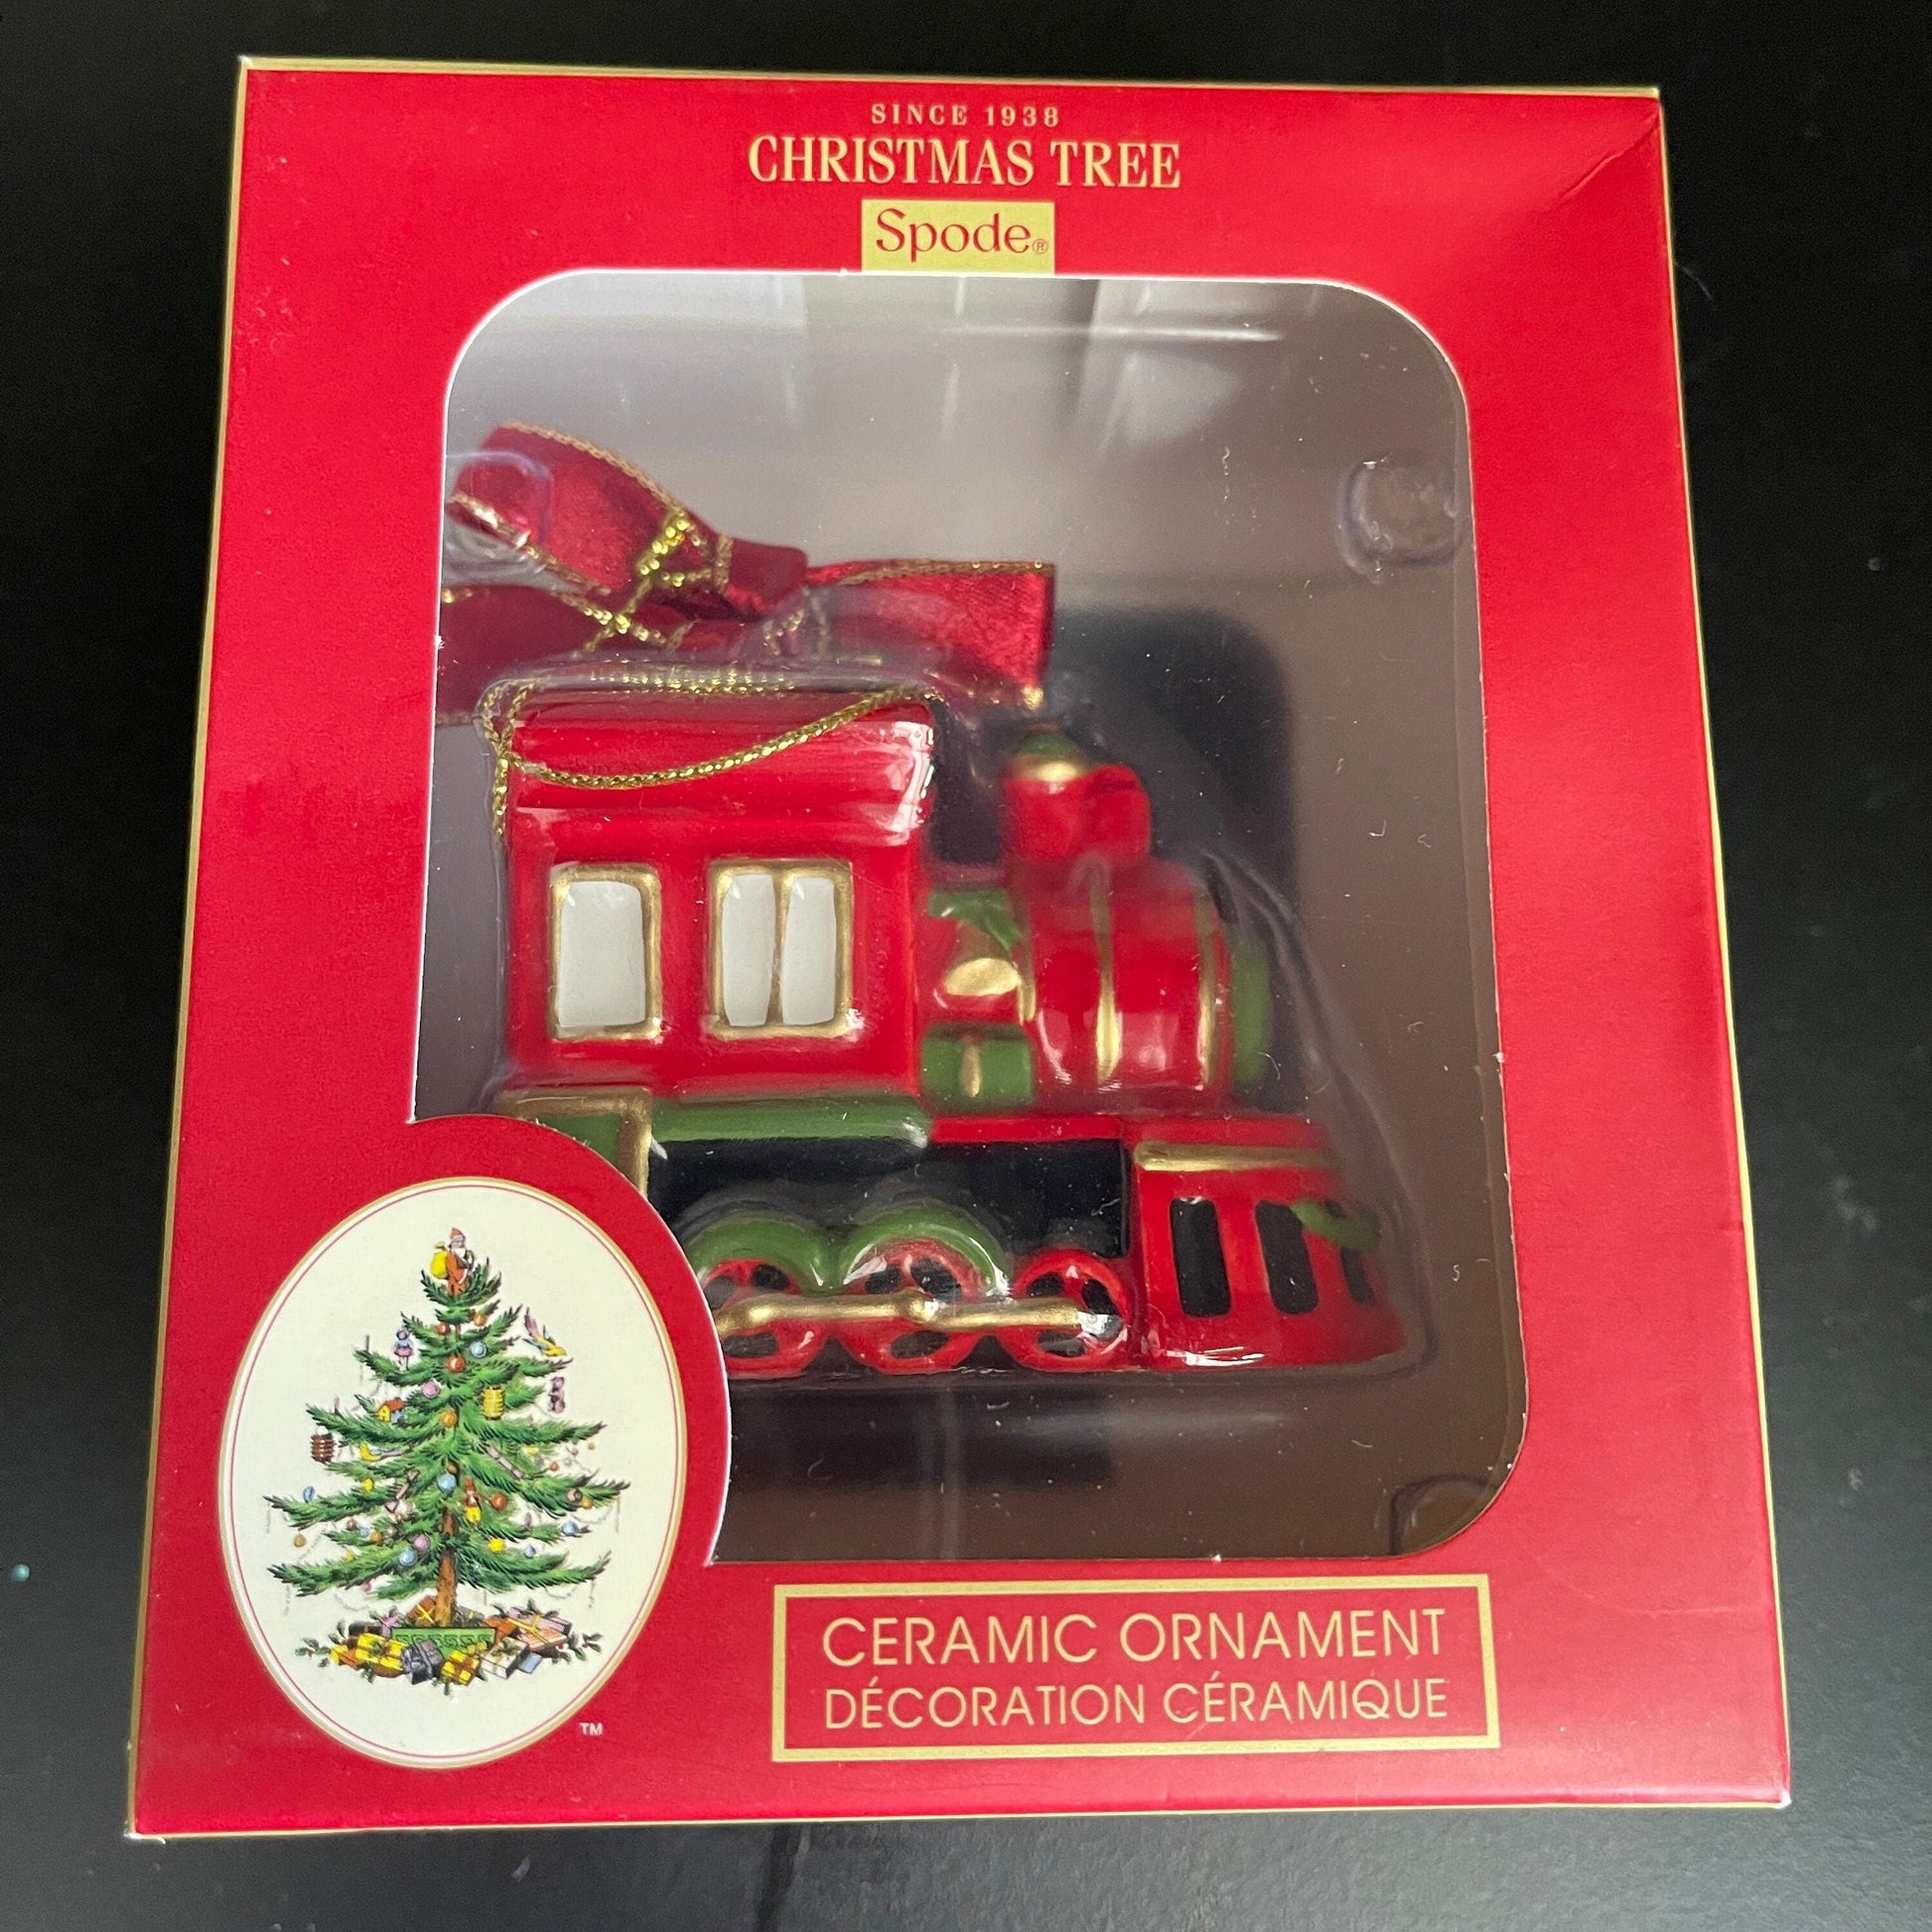 Spode Christmas Tree choice of Santa Clause or Train Engine porcelain ornaments see pictures and variations*